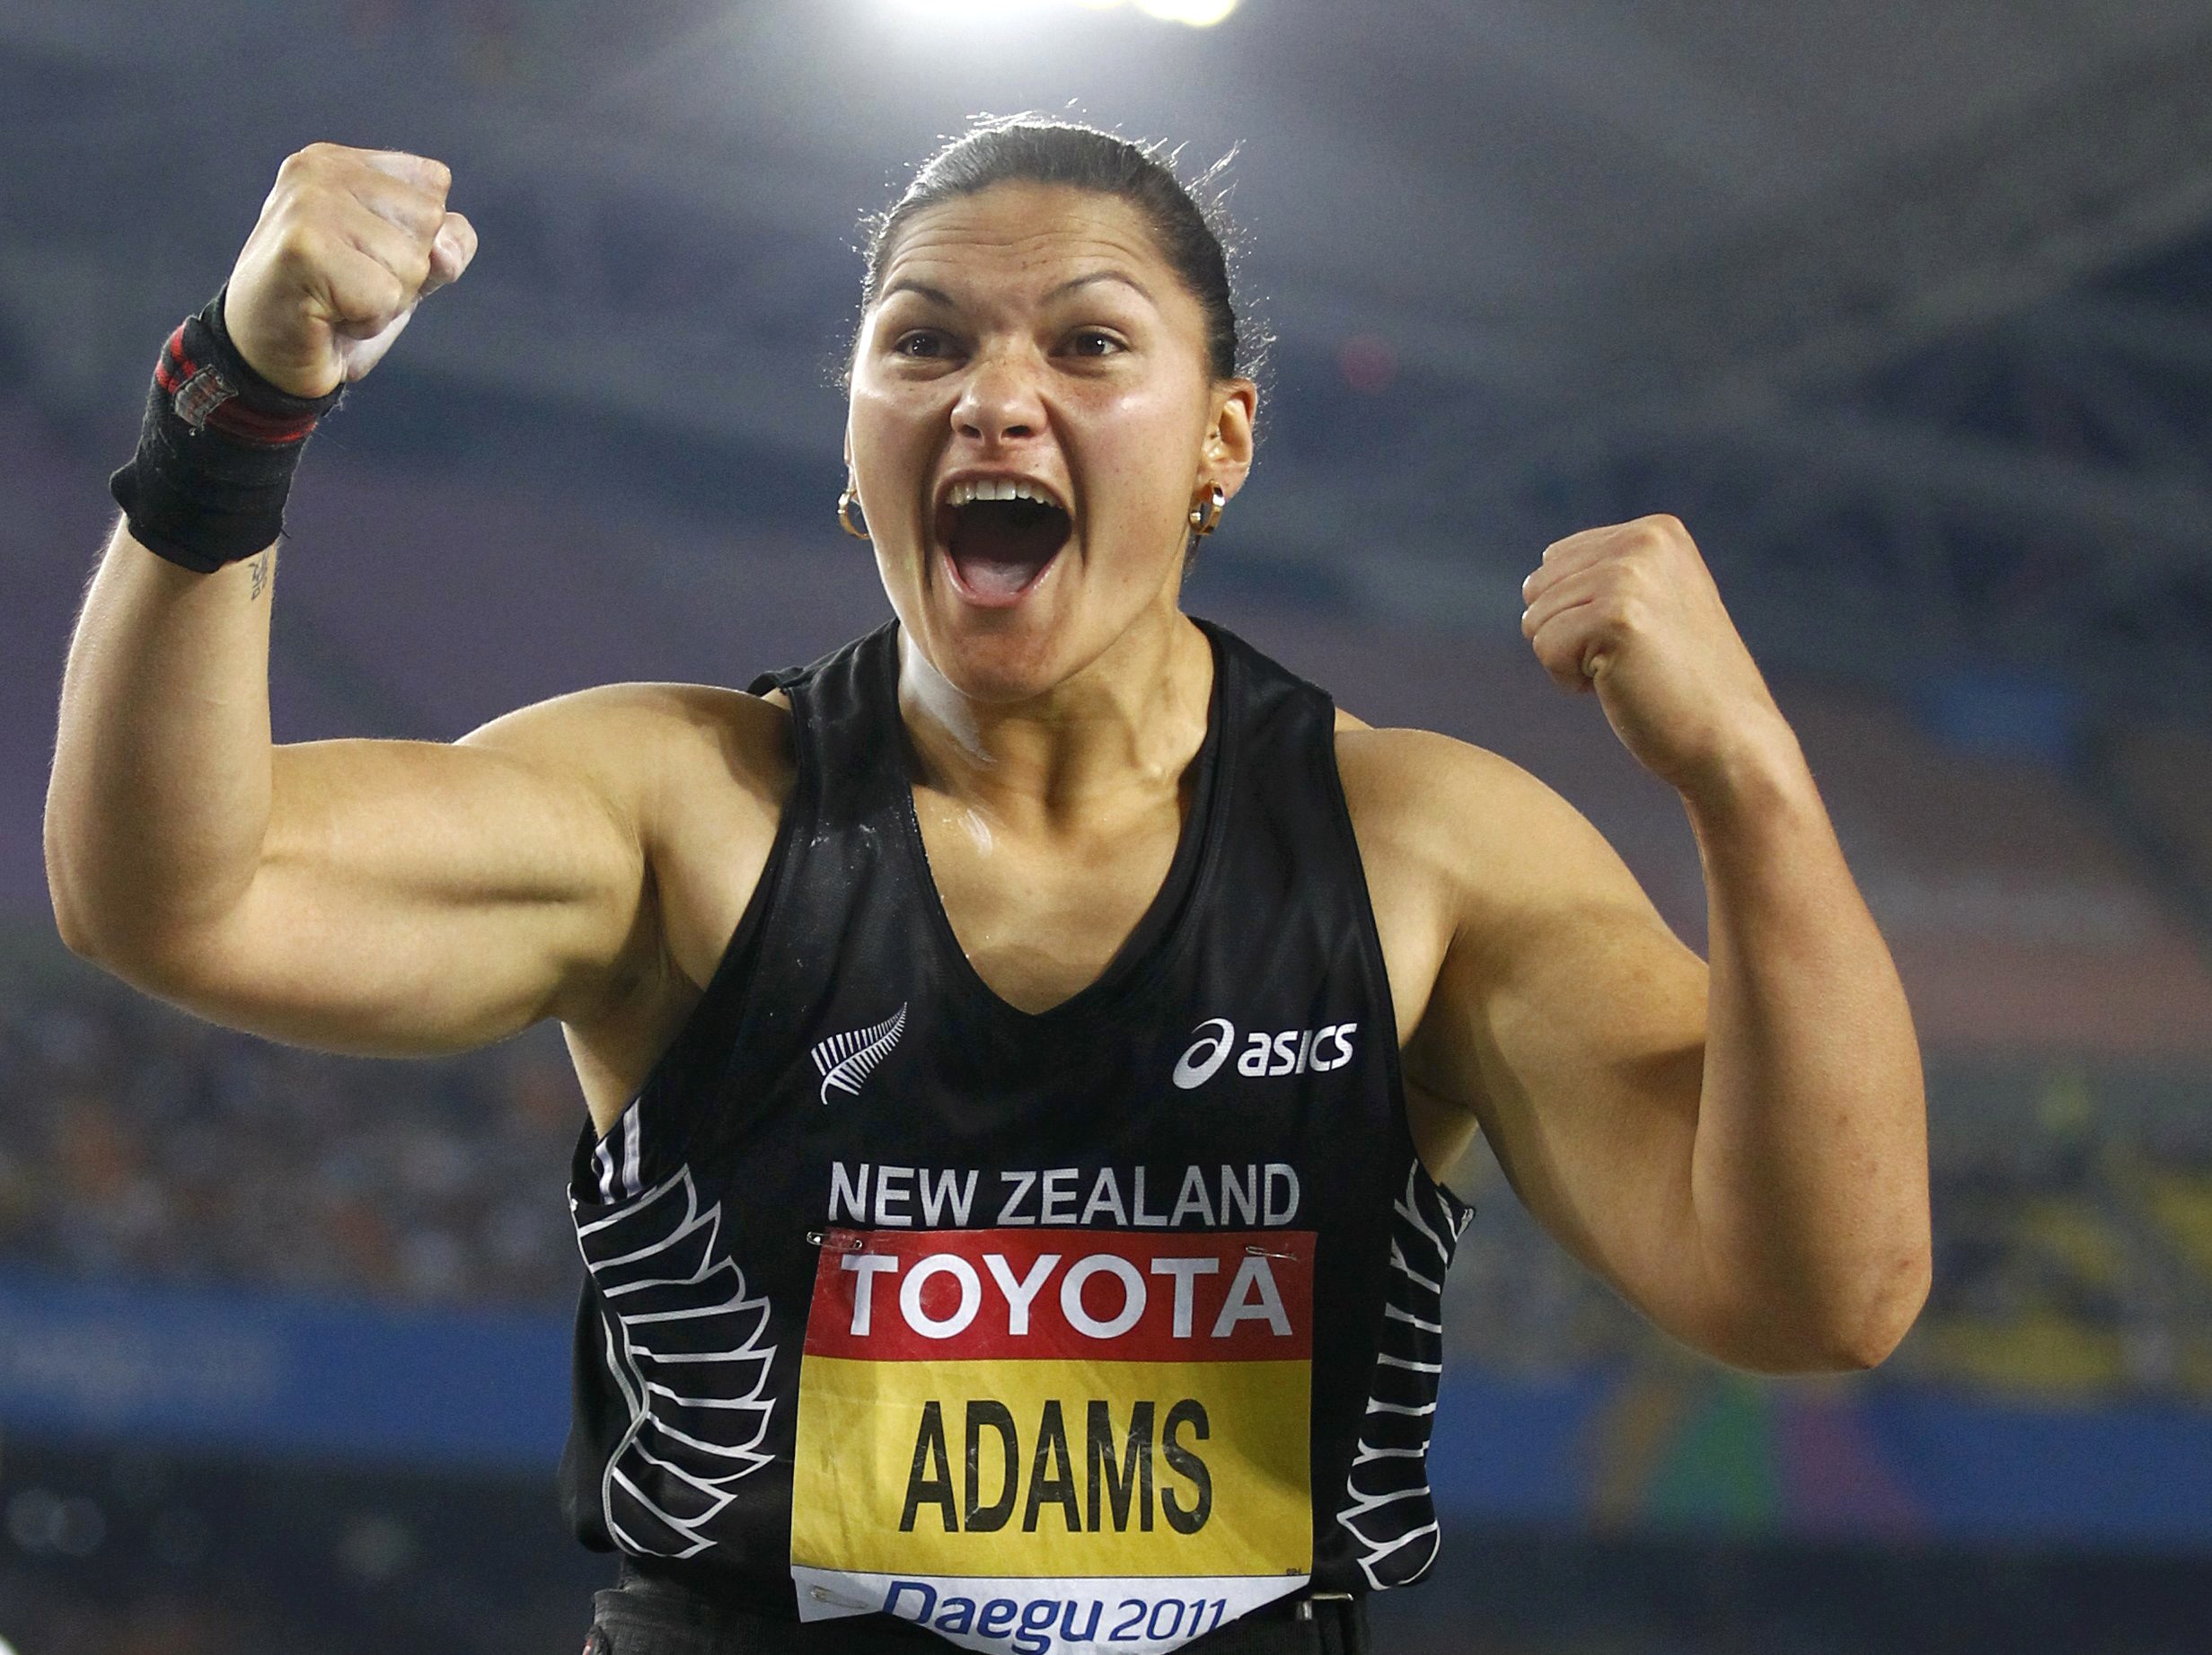 Valerie Adams of New Zealand celebrates after her attempt during the women's shot put final at the IAAF World Championships in Daegu